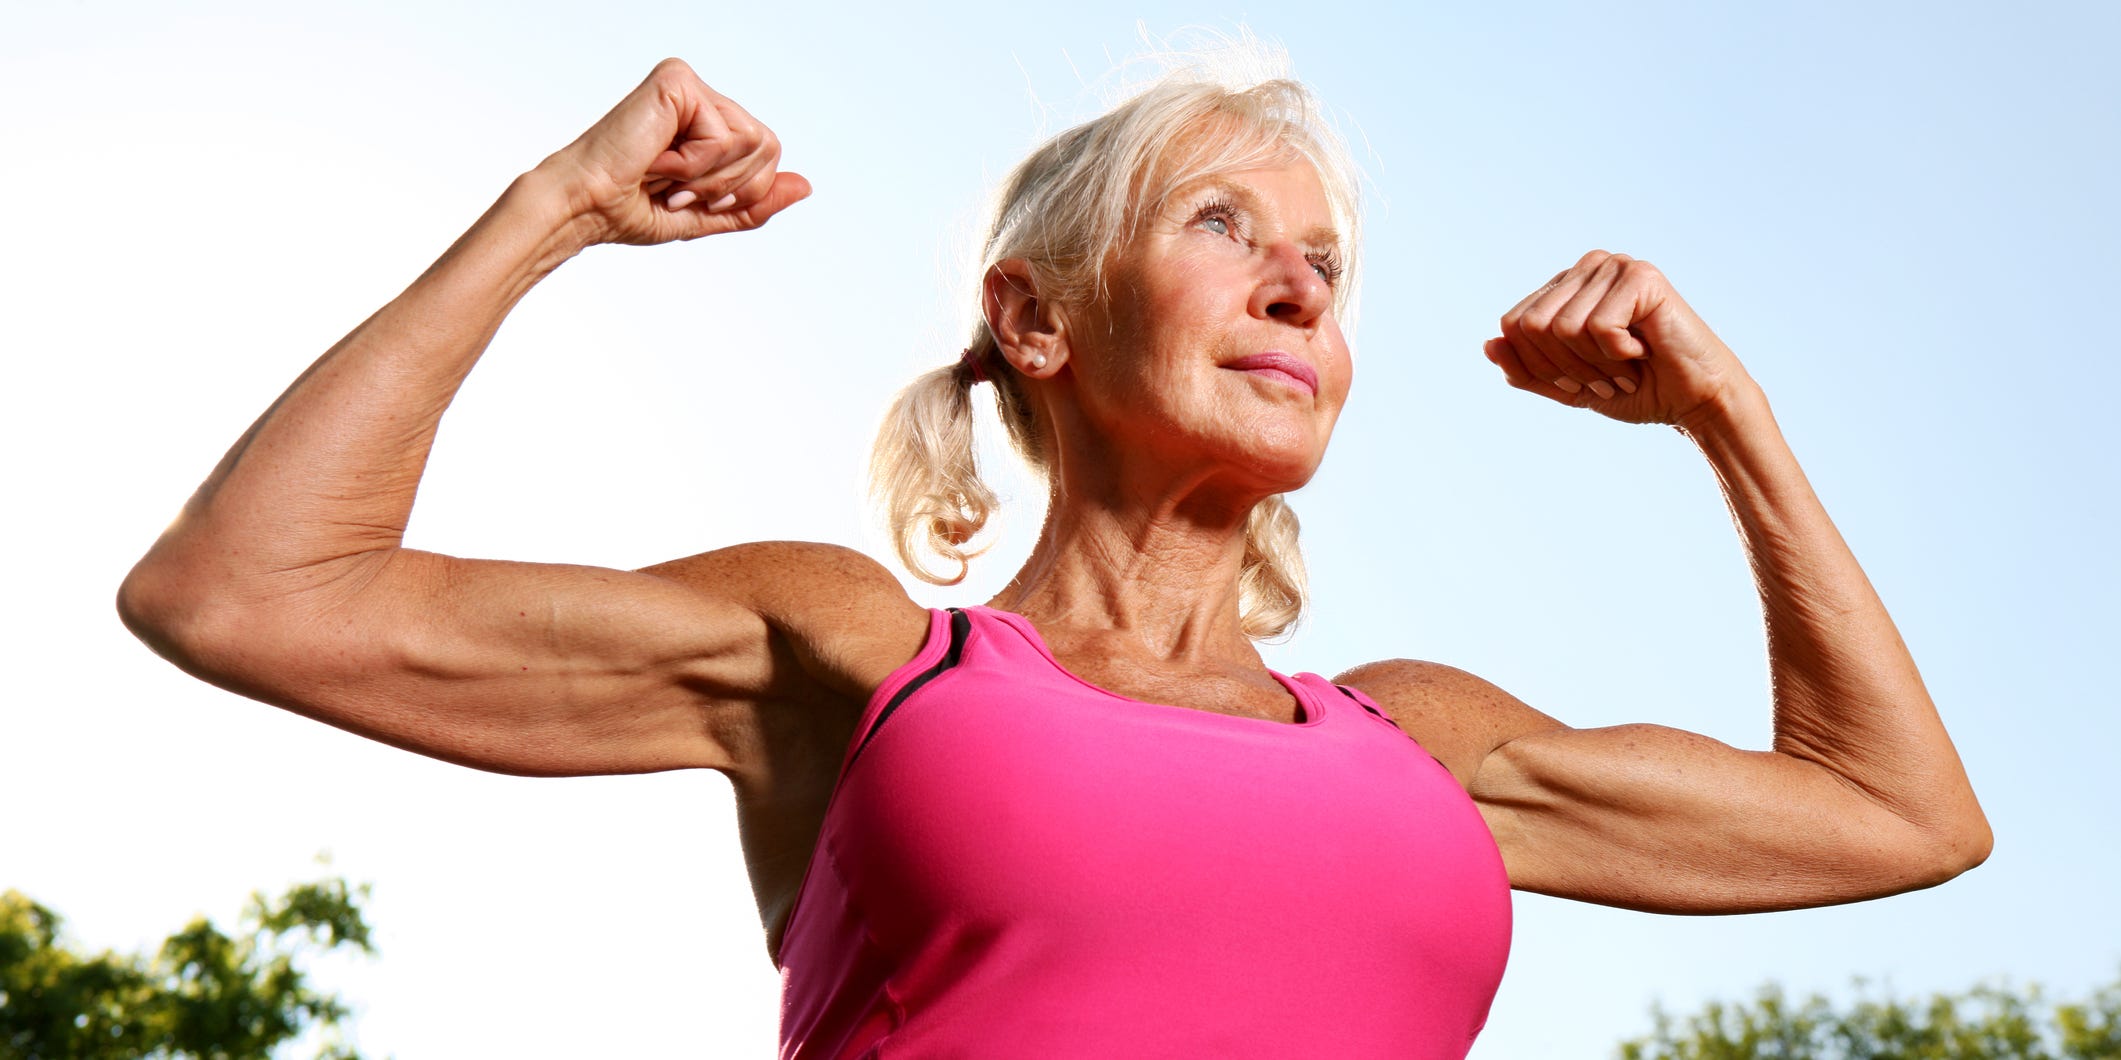 A woman flaunts her bicep muscles.